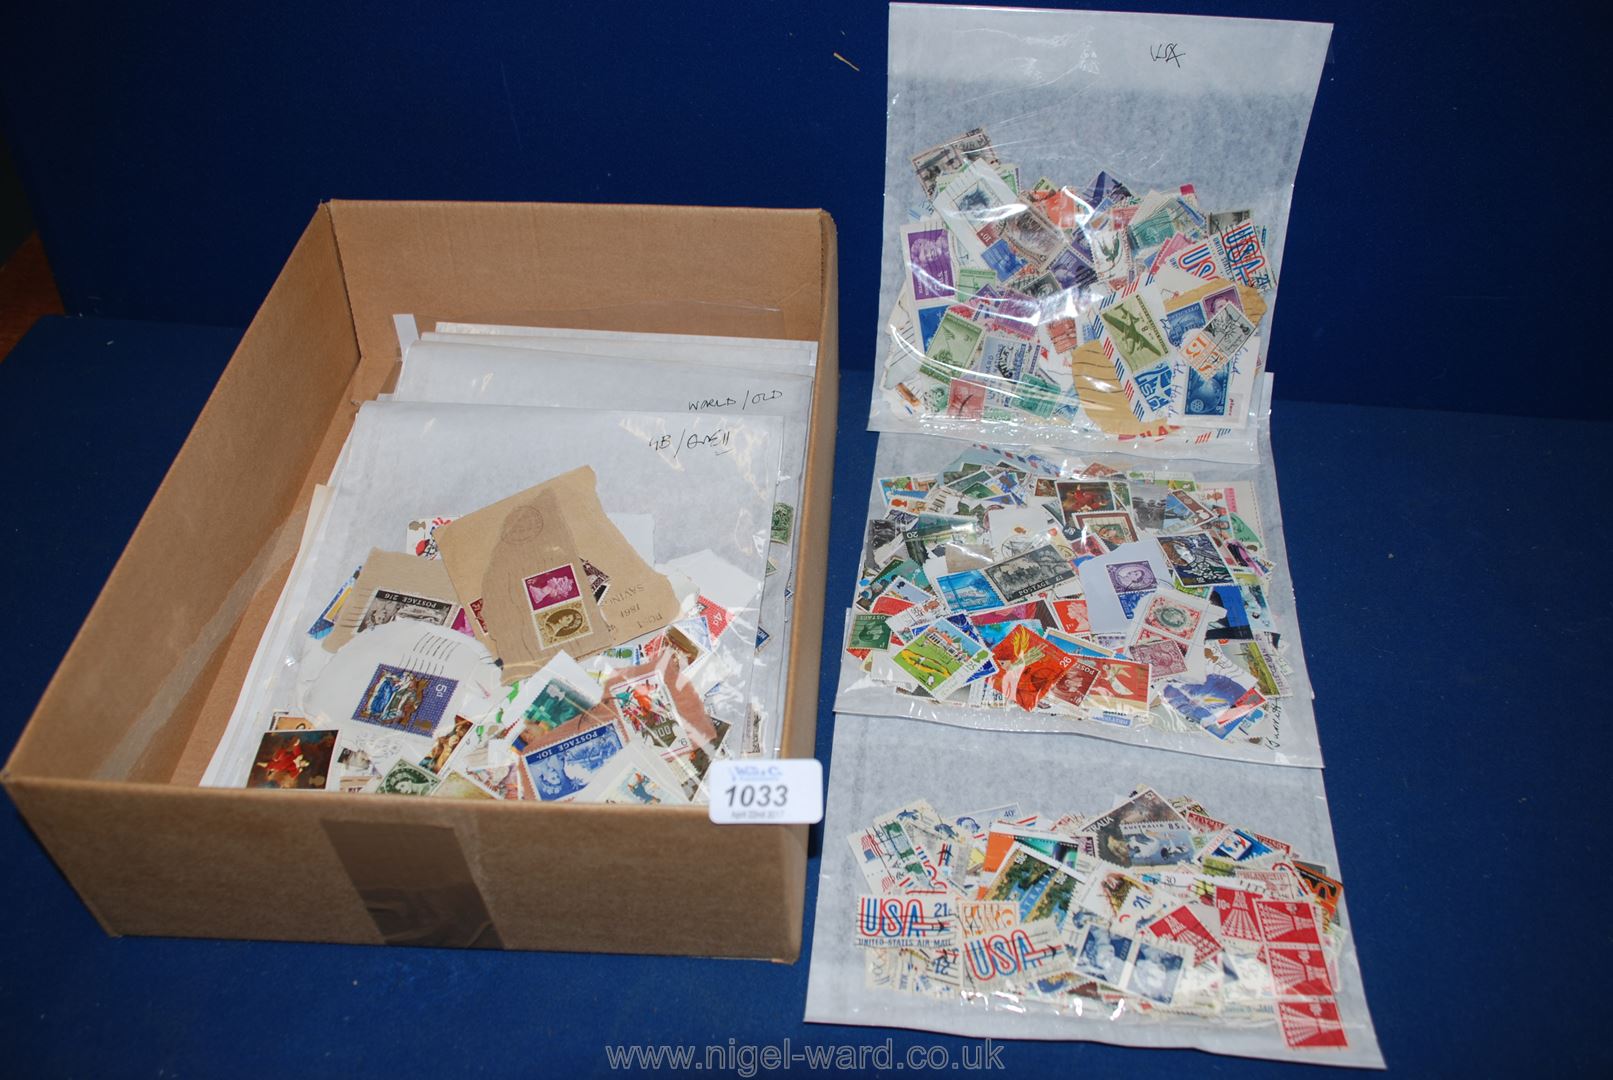 A box of loose stamps in bags.